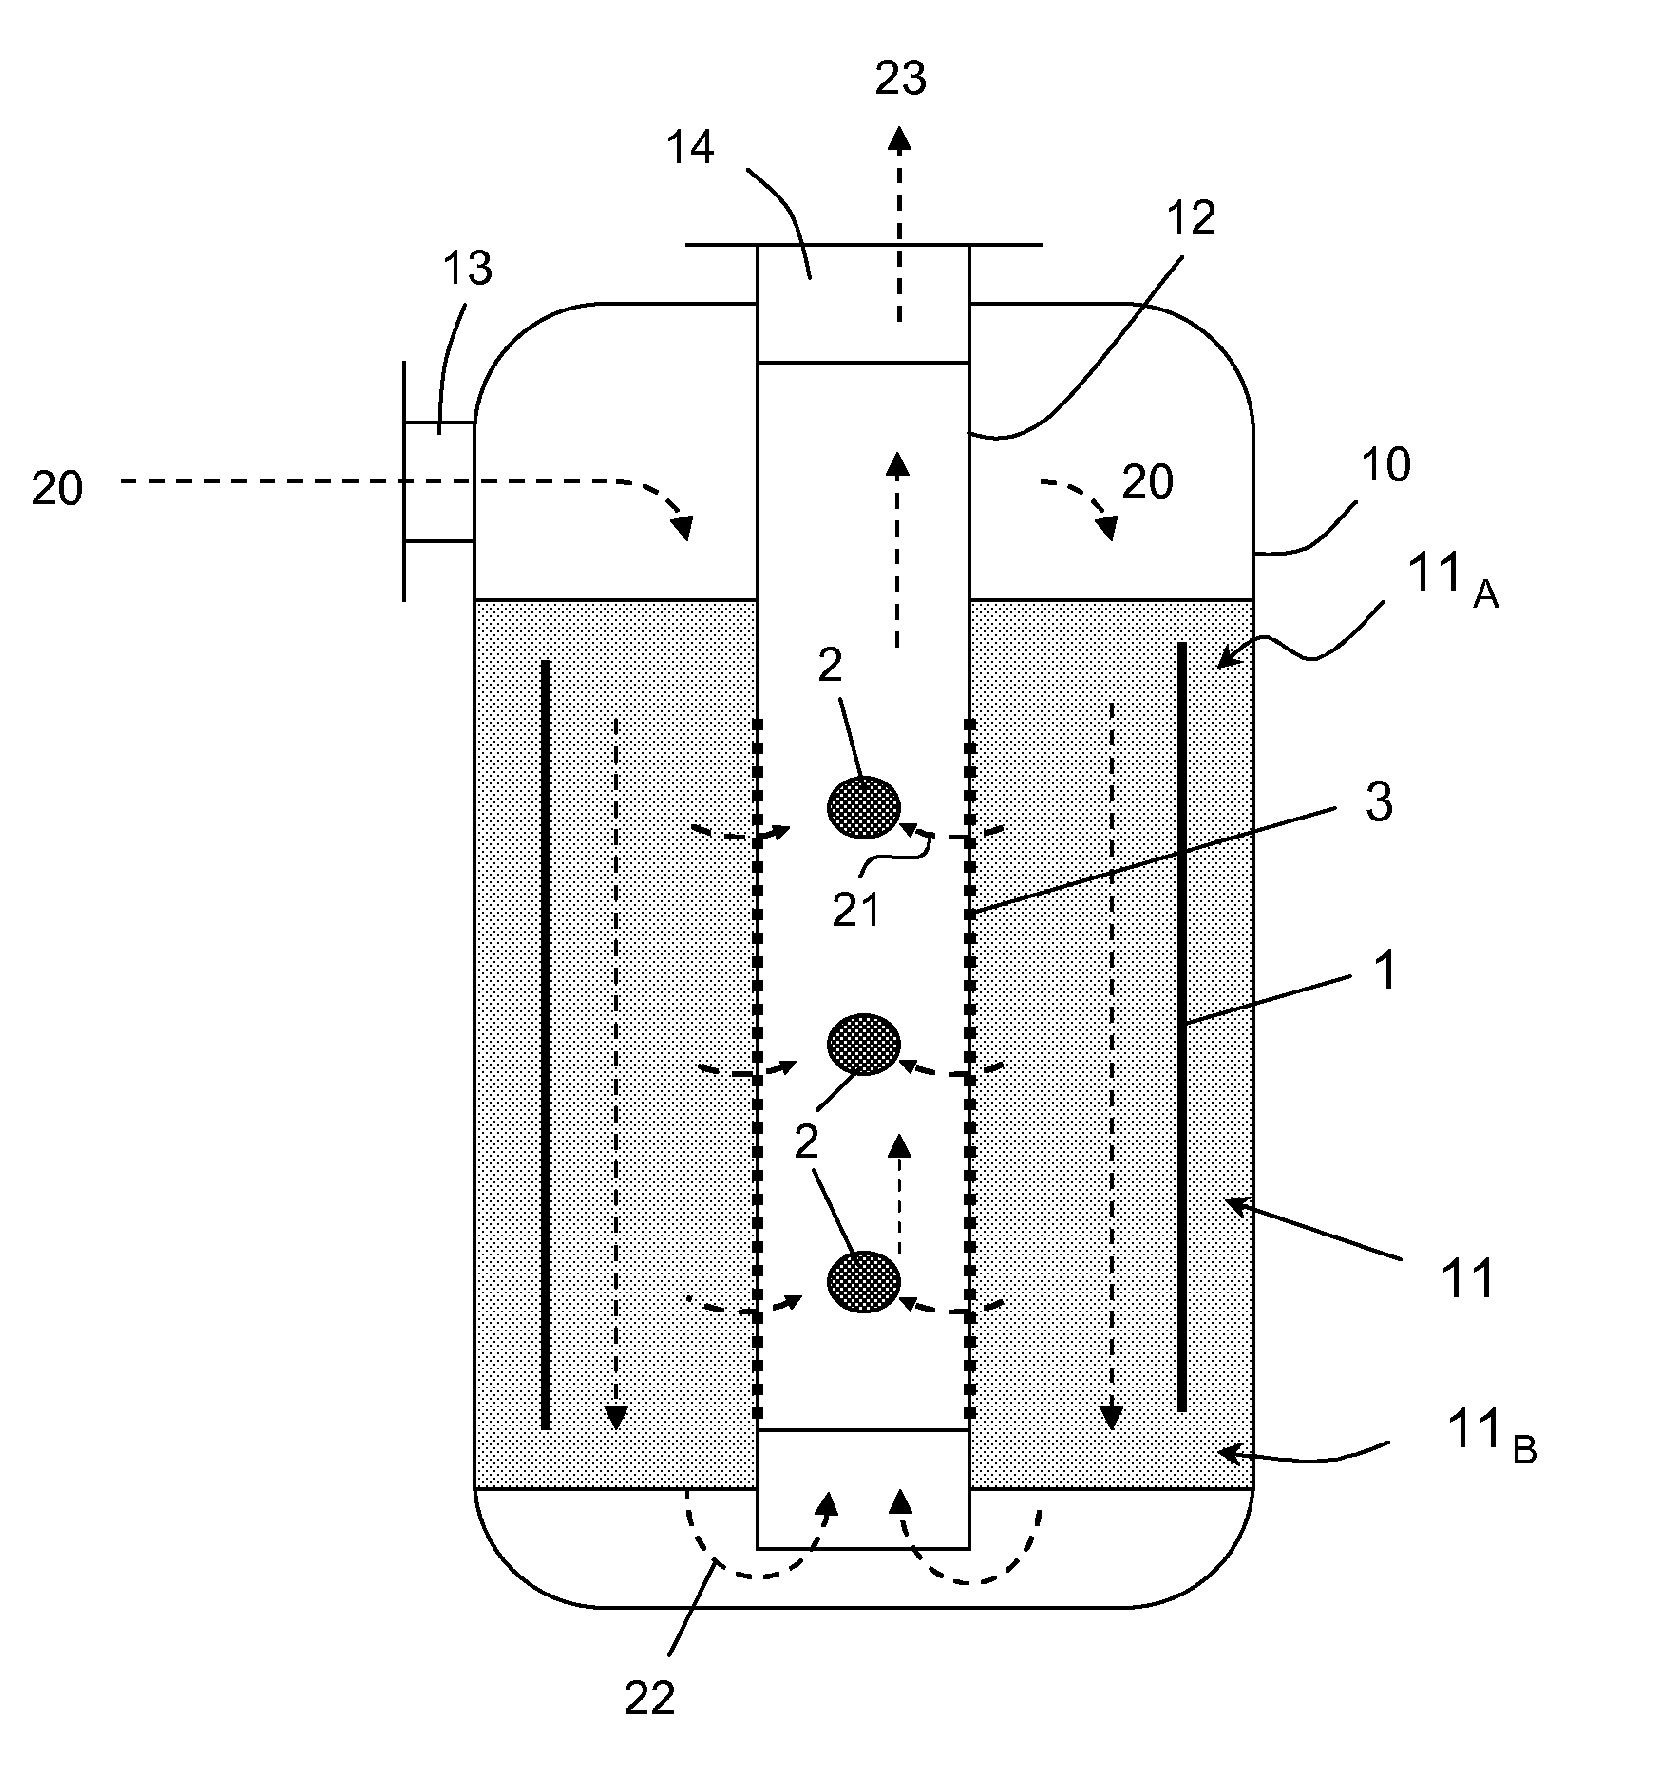 Process for selective removal of a product from a gaseous system